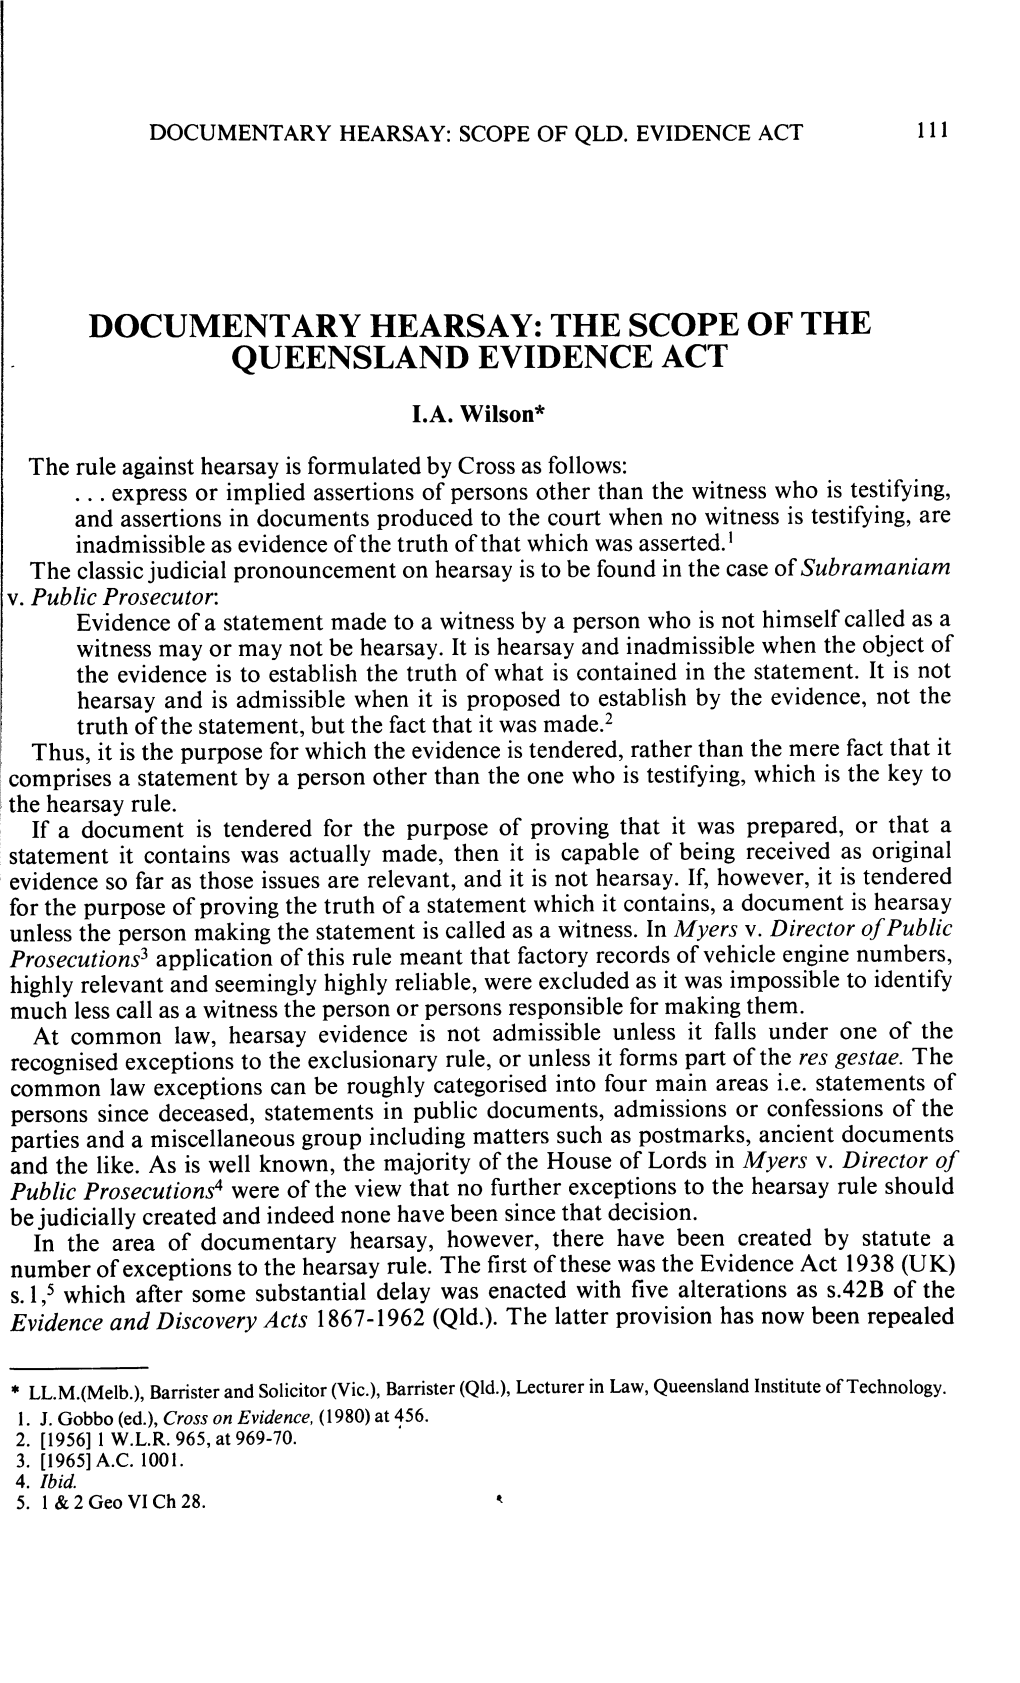 Documentary Hearsay: the Scope of the Queensland Evidence Act